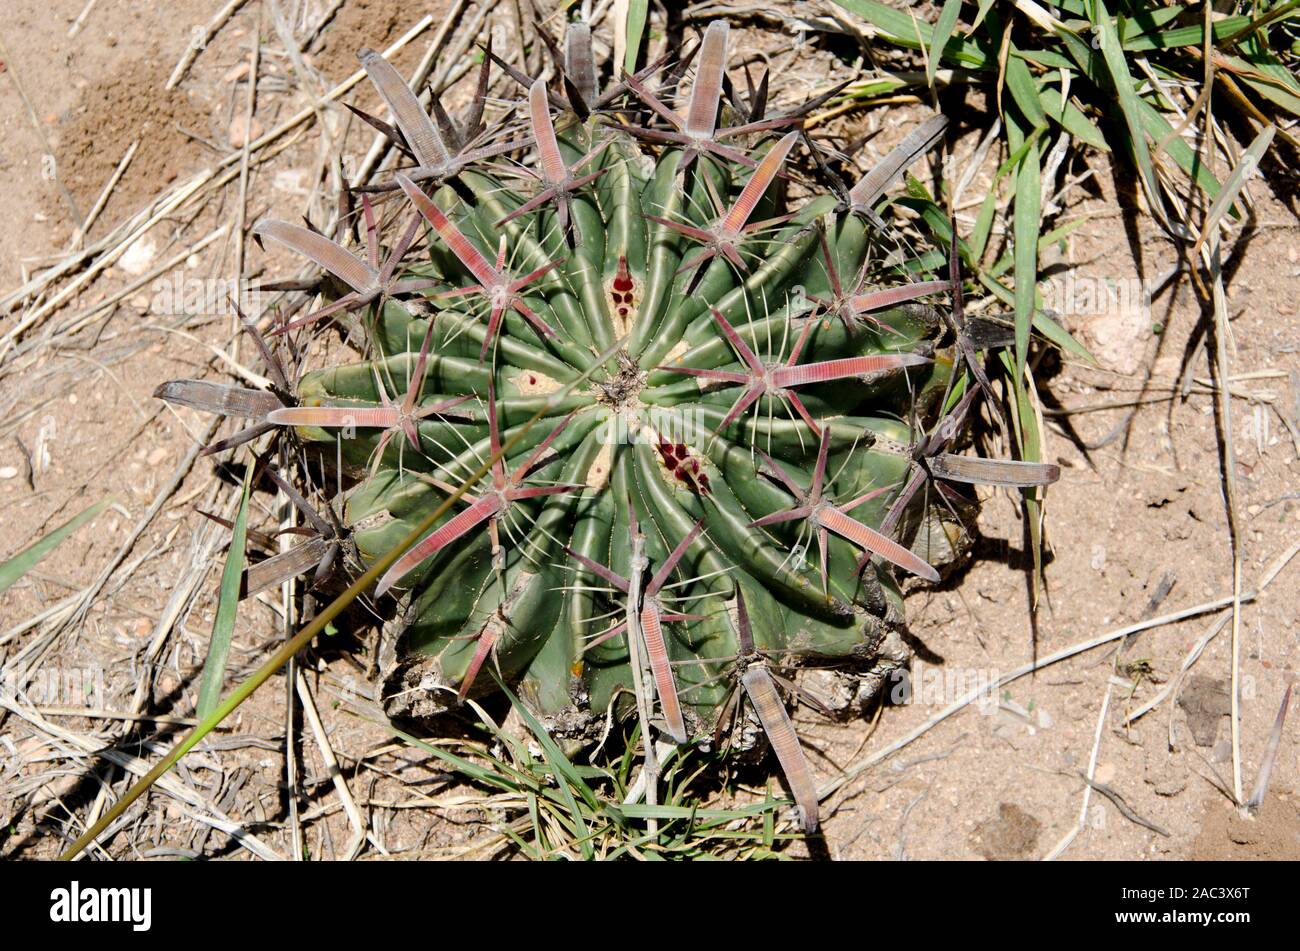 Devil's Tongue Barrel, Ferocactus latispinus, also known as Crow's Claw Cactus or Fish Hook Cactus Stock Photo